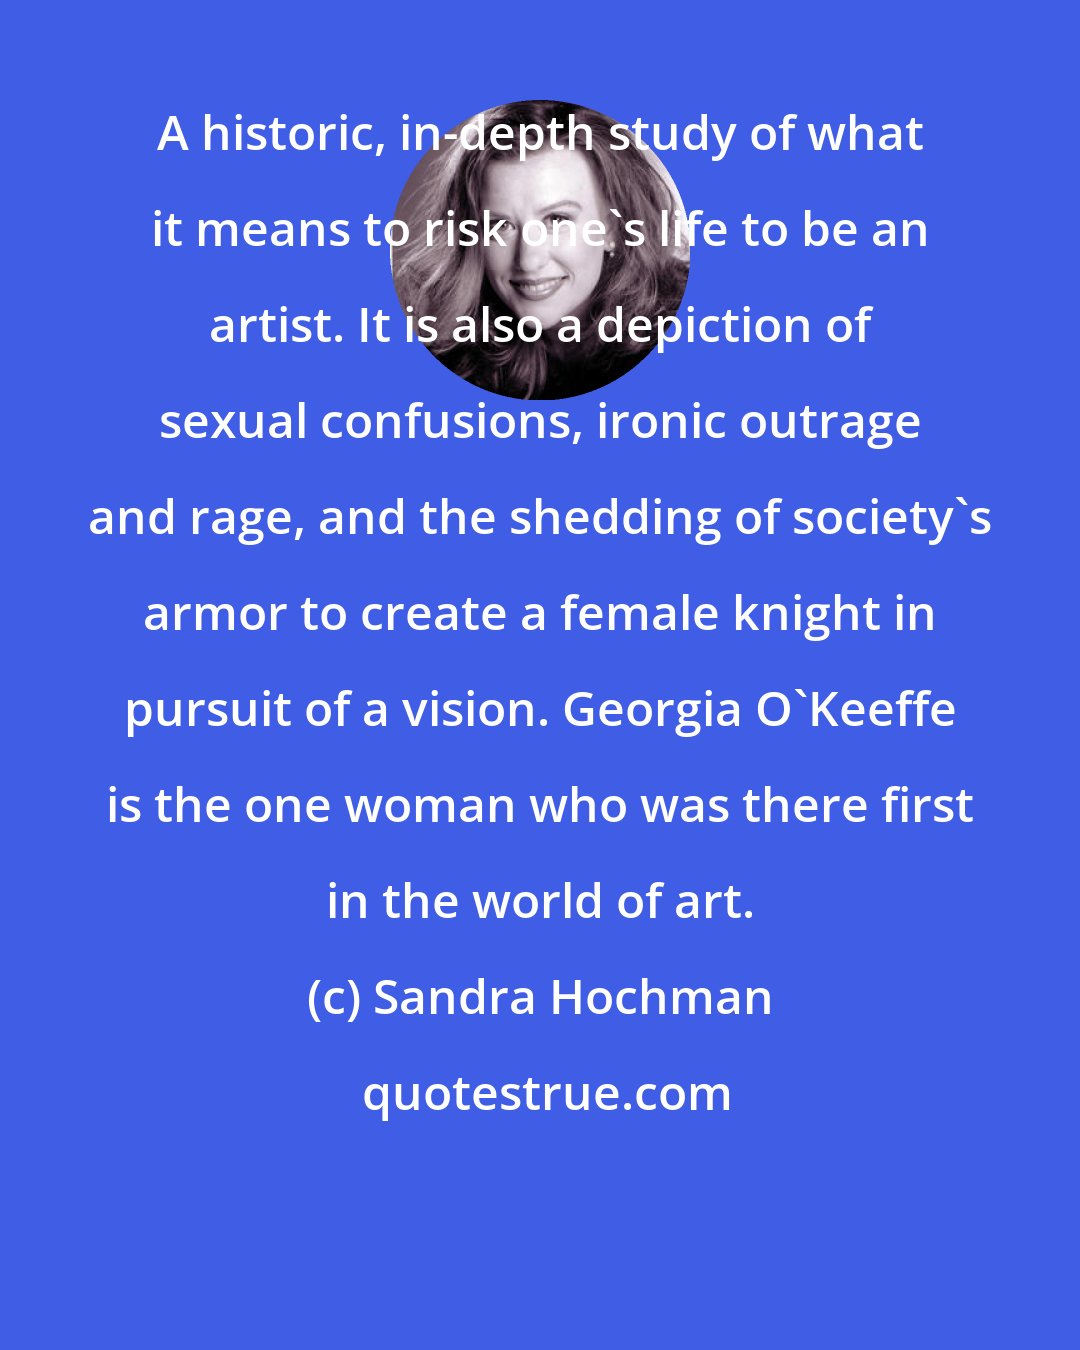 Sandra Hochman: A historic, in-depth study of what it means to risk one's life to be an artist. It is also a depiction of sexual confusions, ironic outrage and rage, and the shedding of society's armor to create a female knight in pursuit of a vision. Georgia O'Keeffe is the one woman who was there first in the world of art.